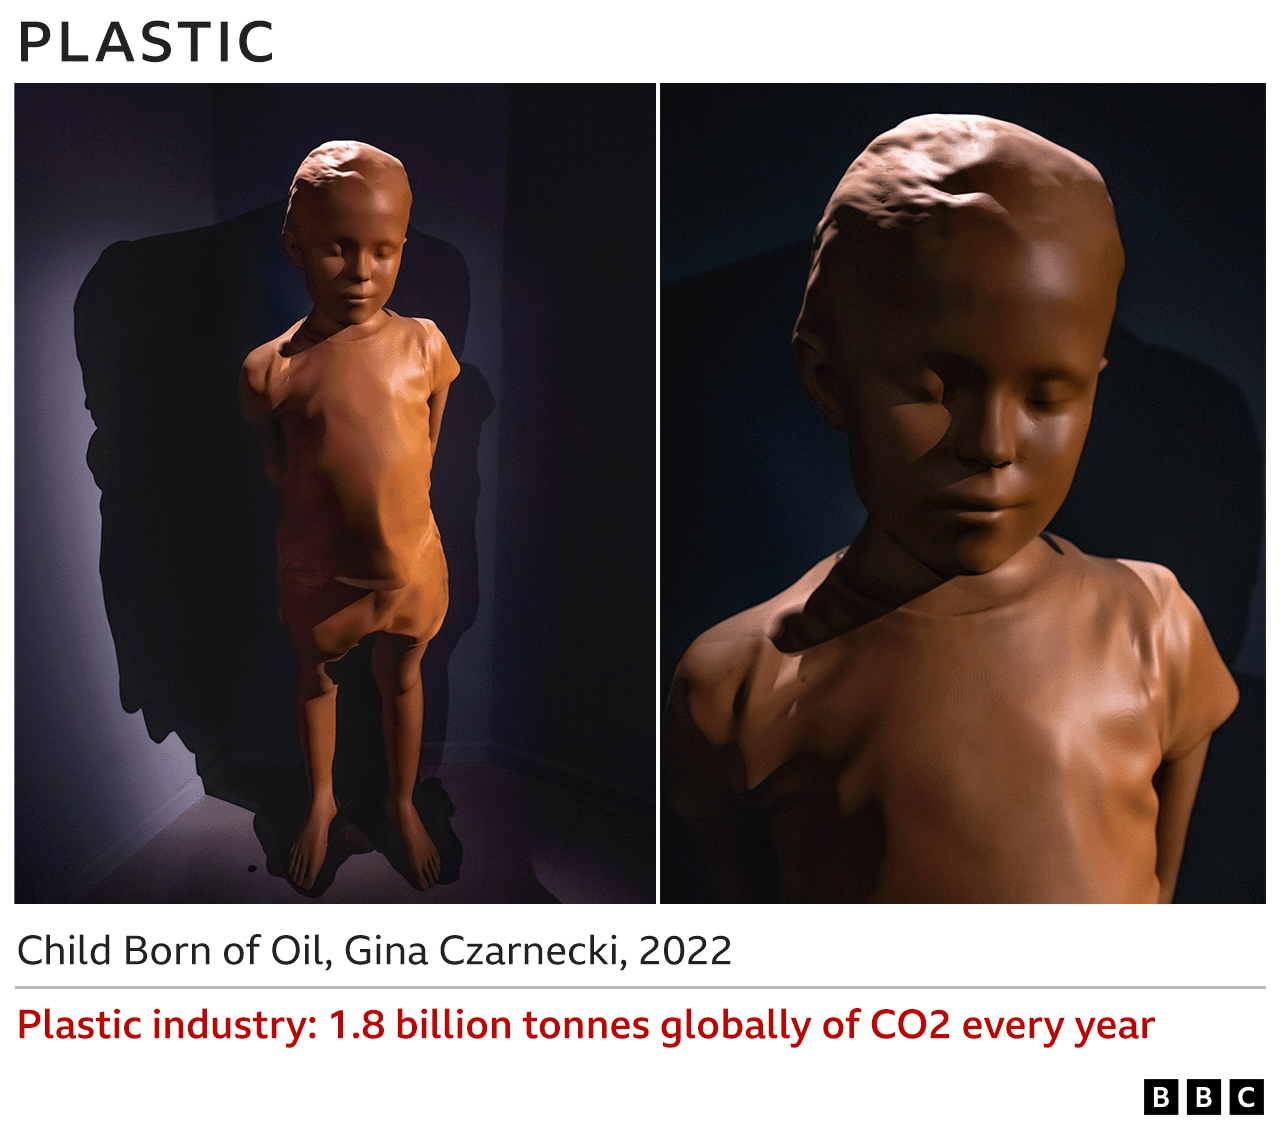 Images of plastic sculpture - Child Born of Oil, Gina Czarnecki, 2022 - Plastic industry 1.8bn tonnes globally of CO2 every year